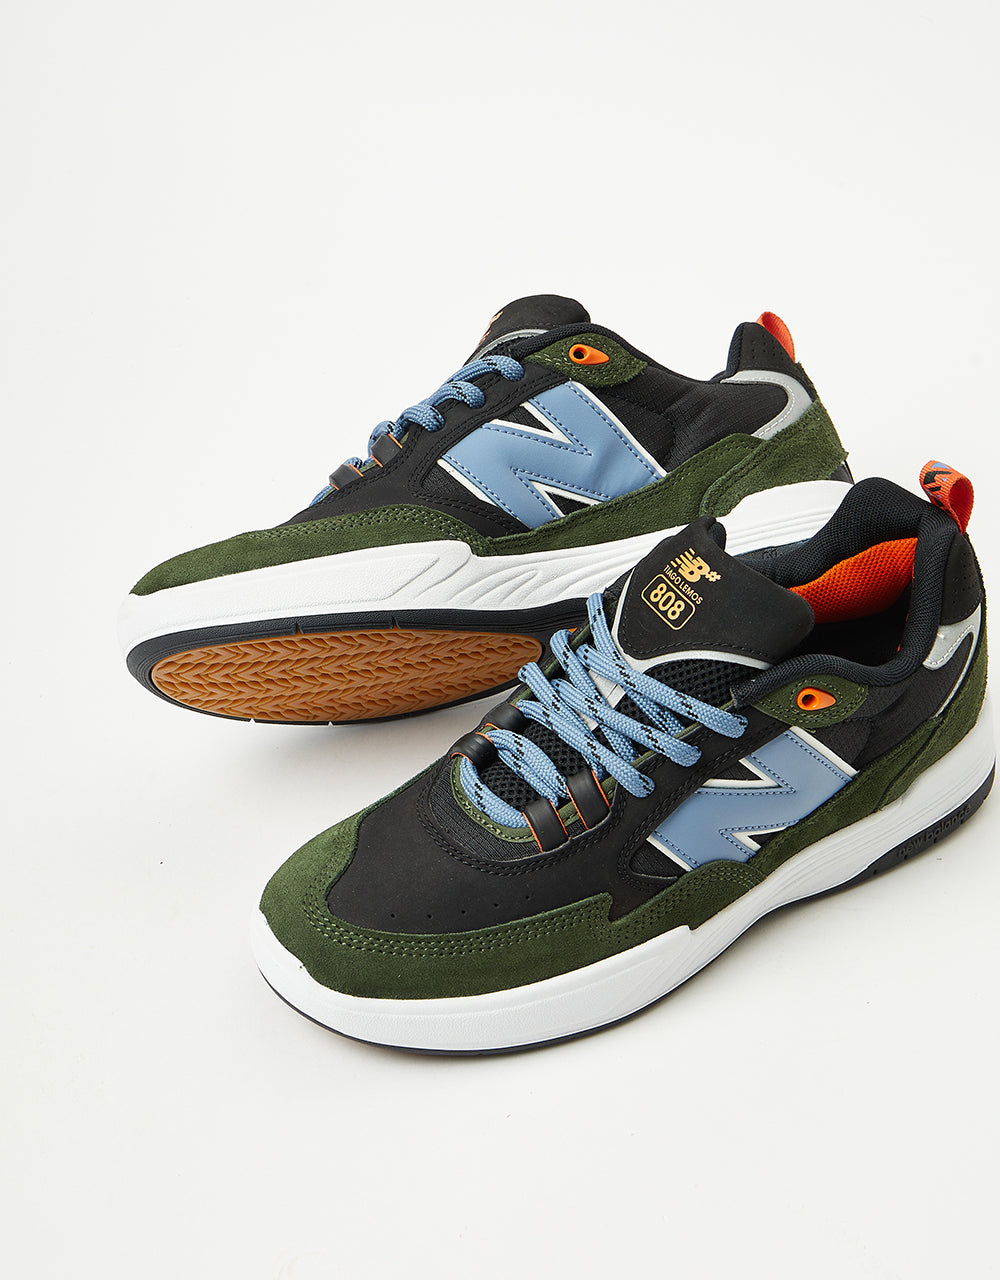 New Balance Numeric 808 Skate Shoes - Forest/Black